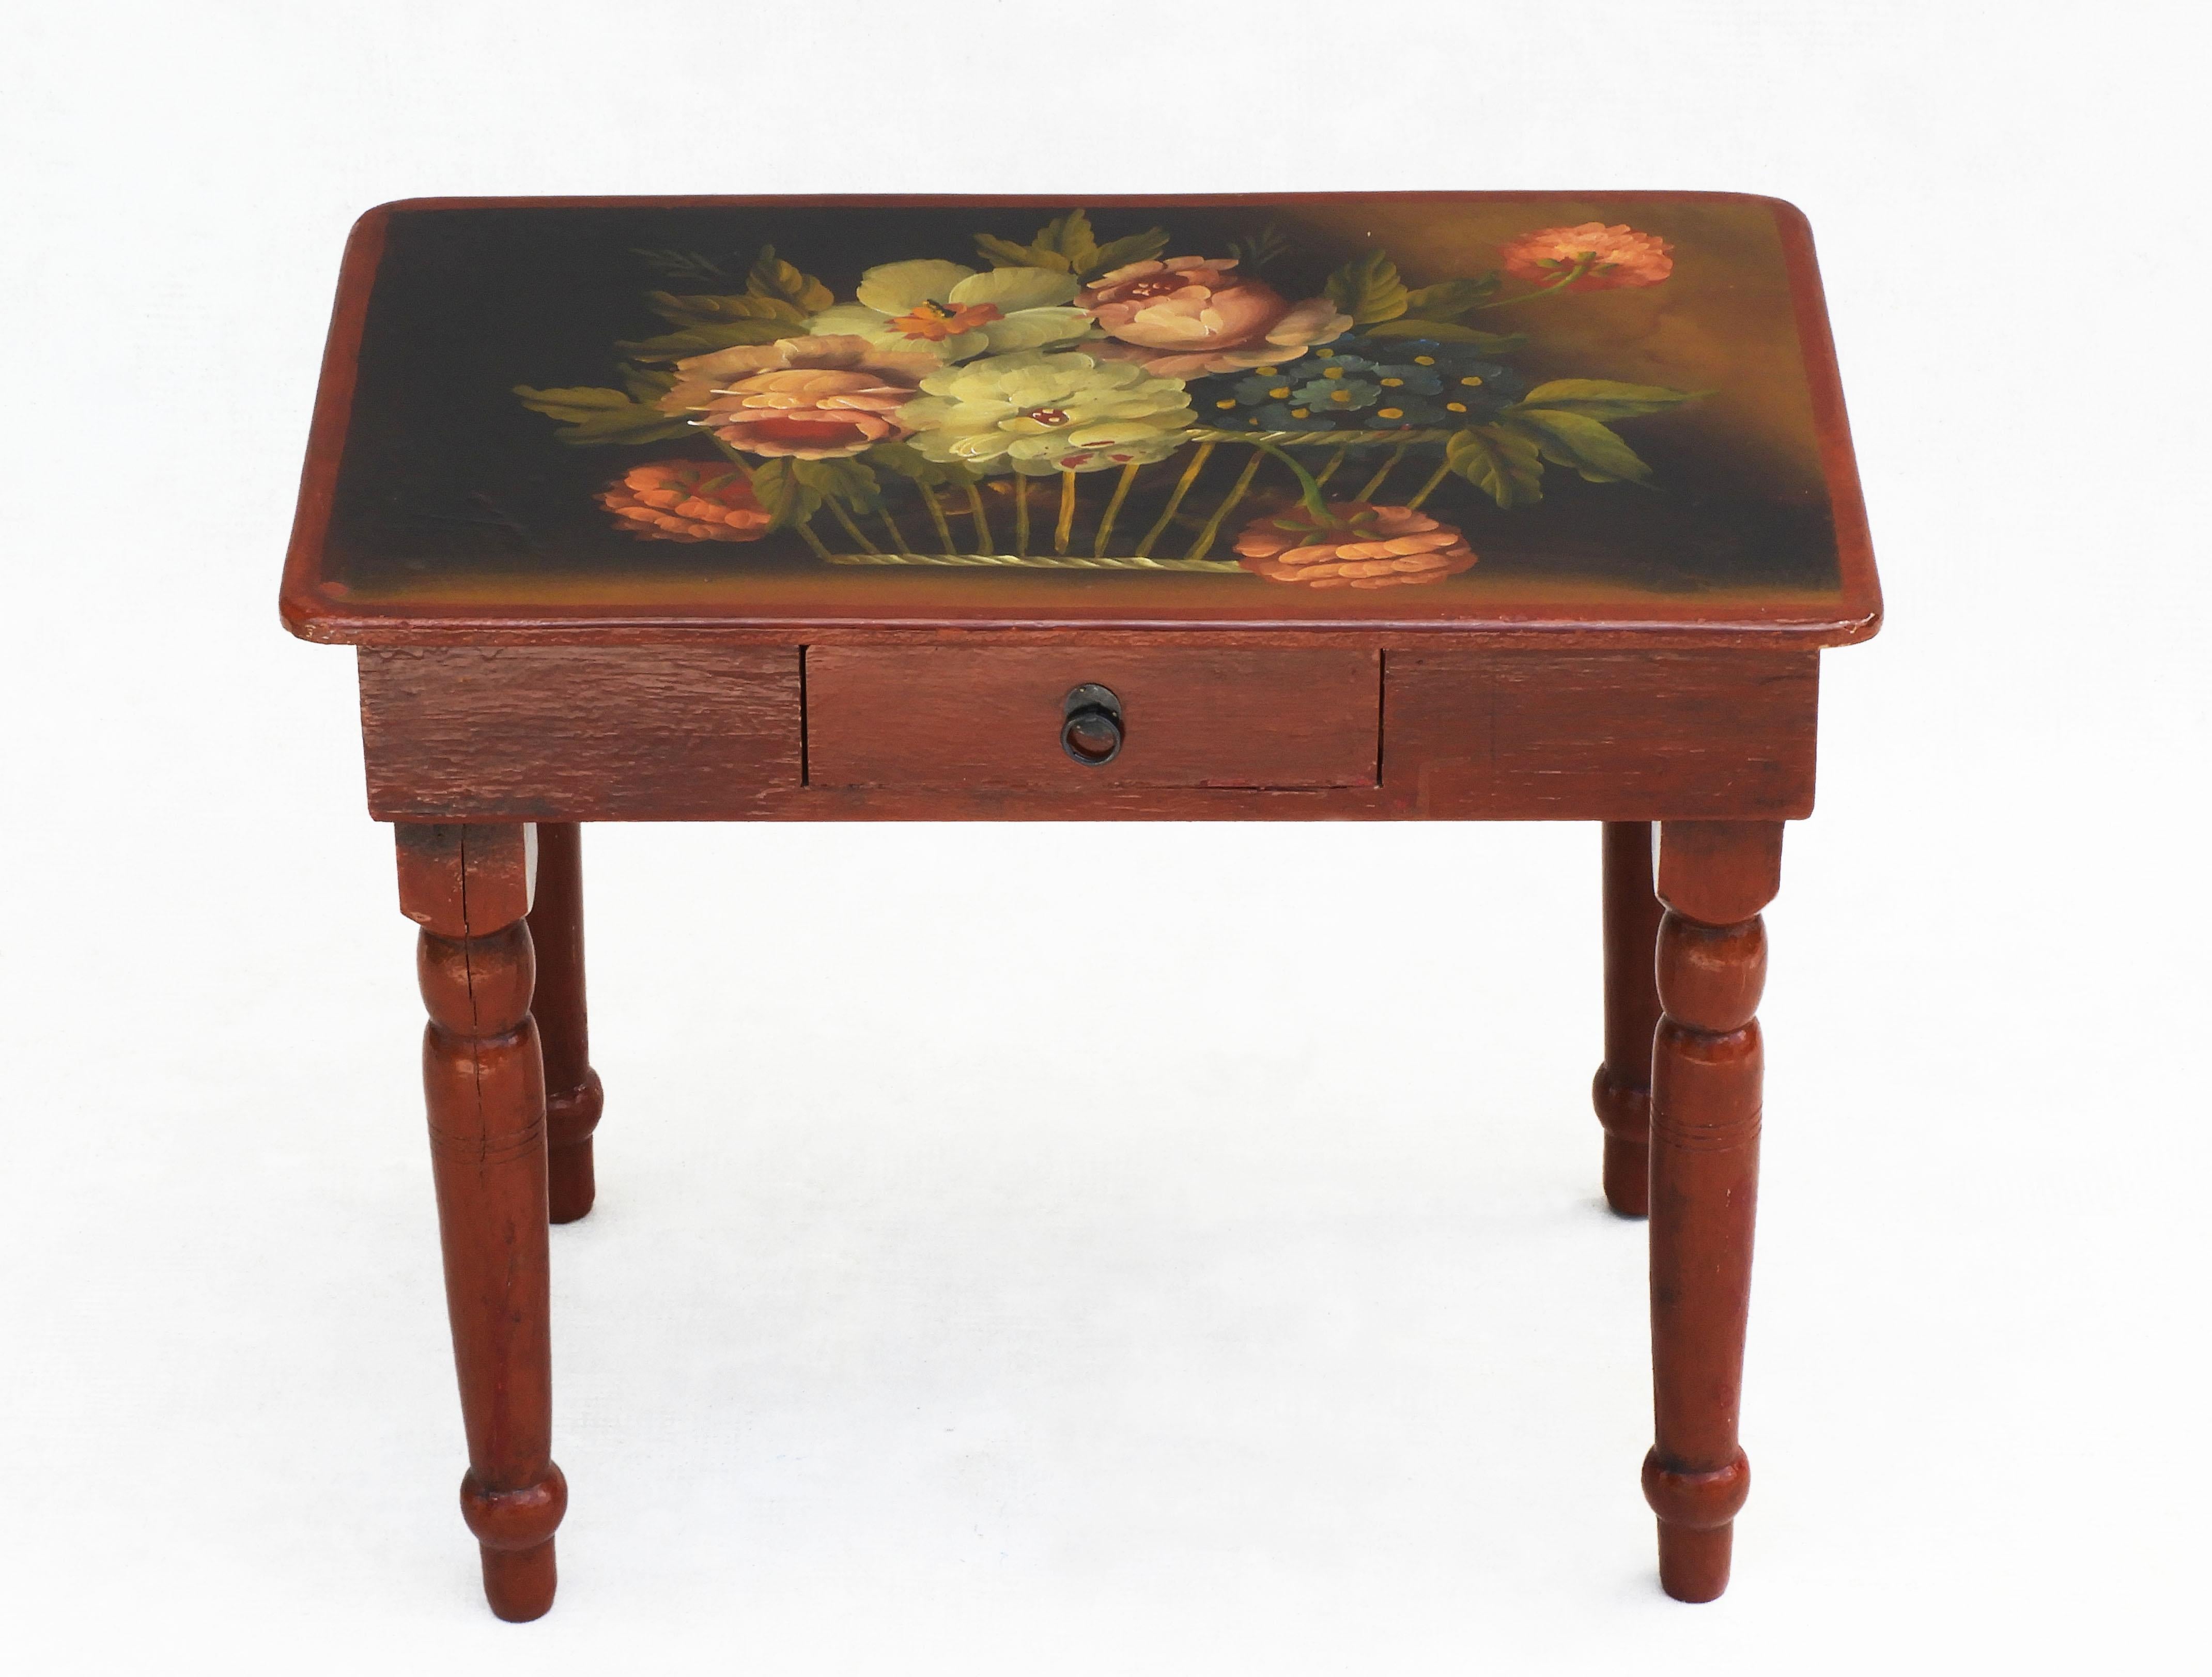 Vintage Folk Art hand-painted table C1940s France.
Charming French wooden side table beautifully decorated with a floral arrangement. A lovely example of early 20th century French 'Arte Populaire', perfect as a side table next to an armchair, a